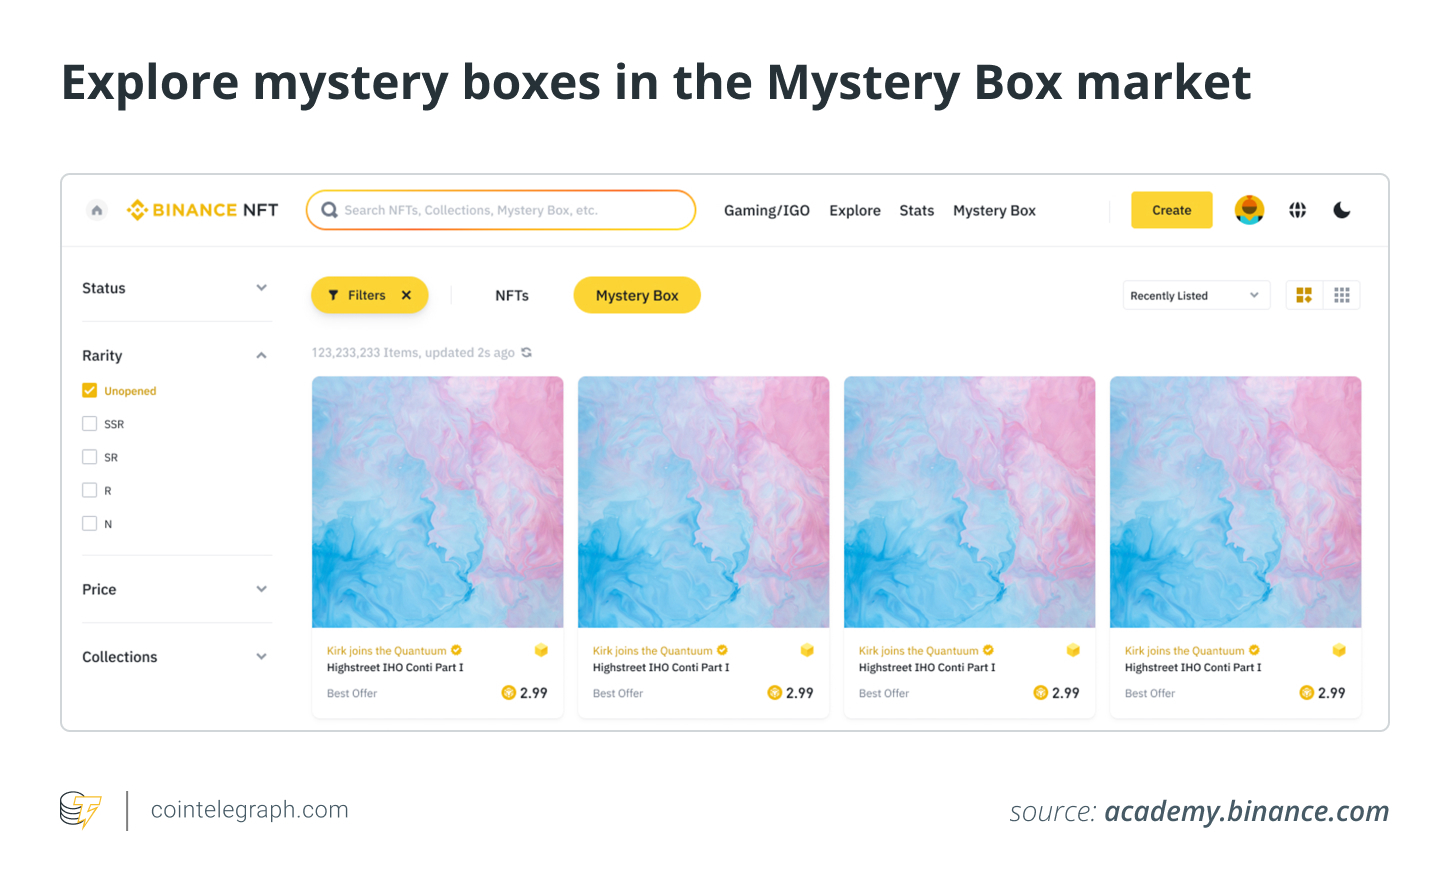 Explore mystery boxes in the Mystery Box market